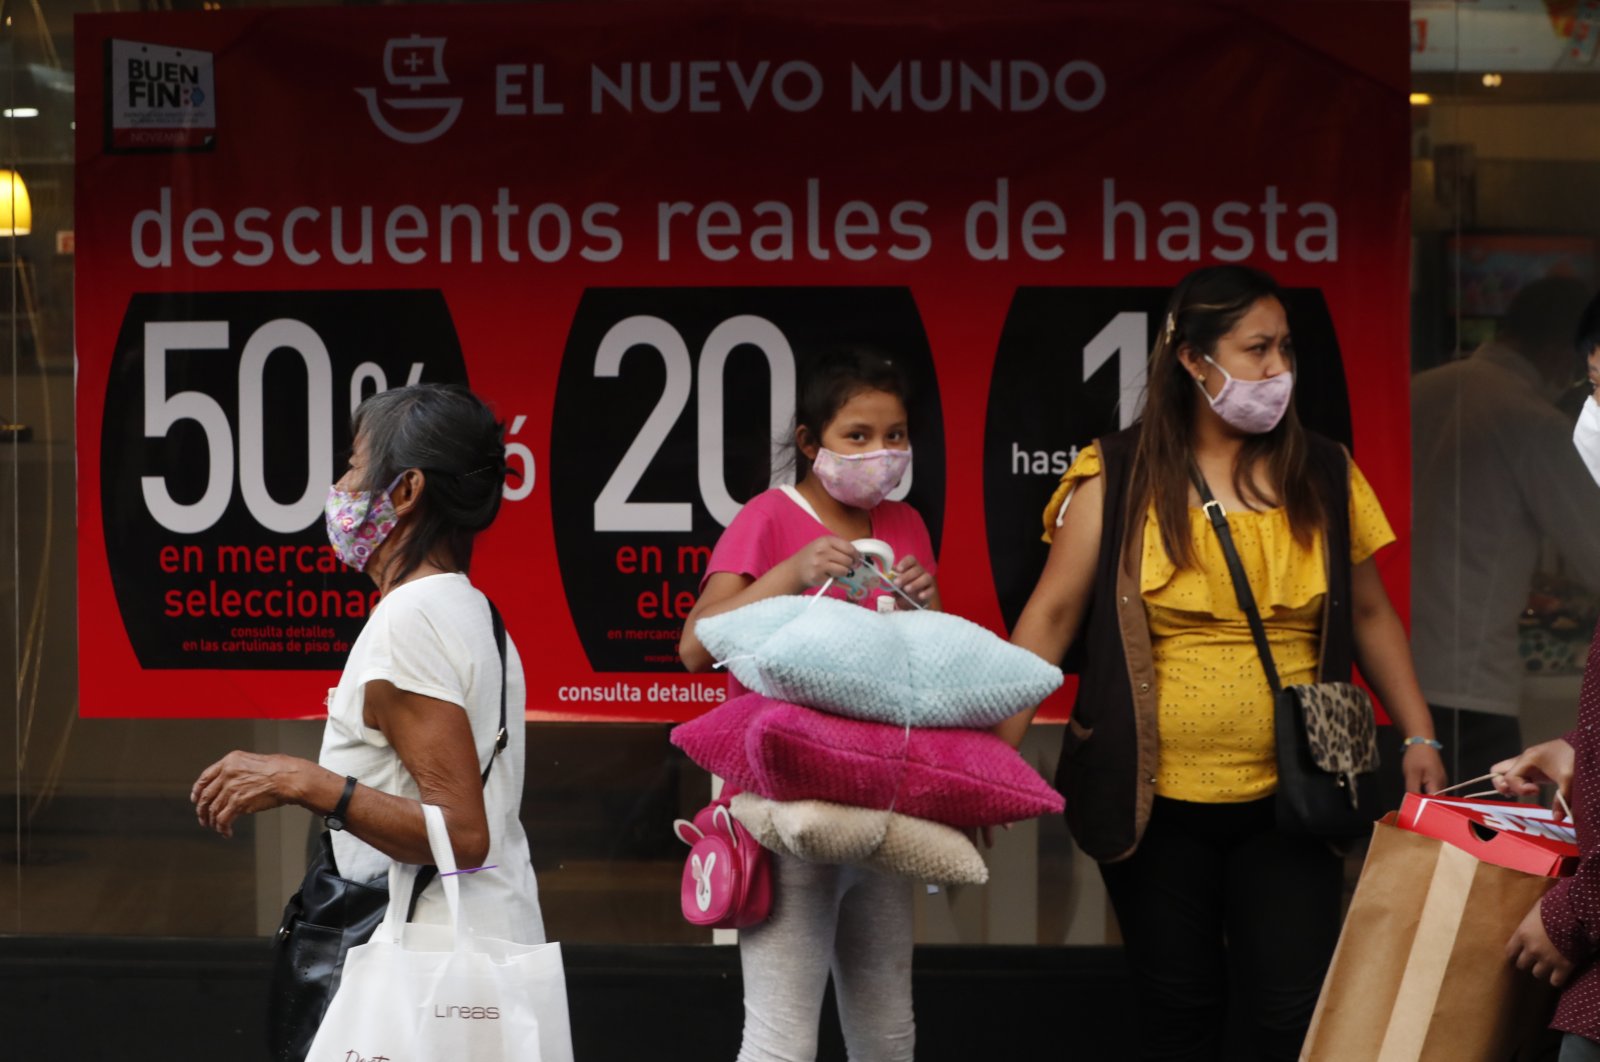 Several people make purchases on the occasion of "Good End" season, in Mexico City, Mexico, Nov. 11, 2021. (EPA Photo)